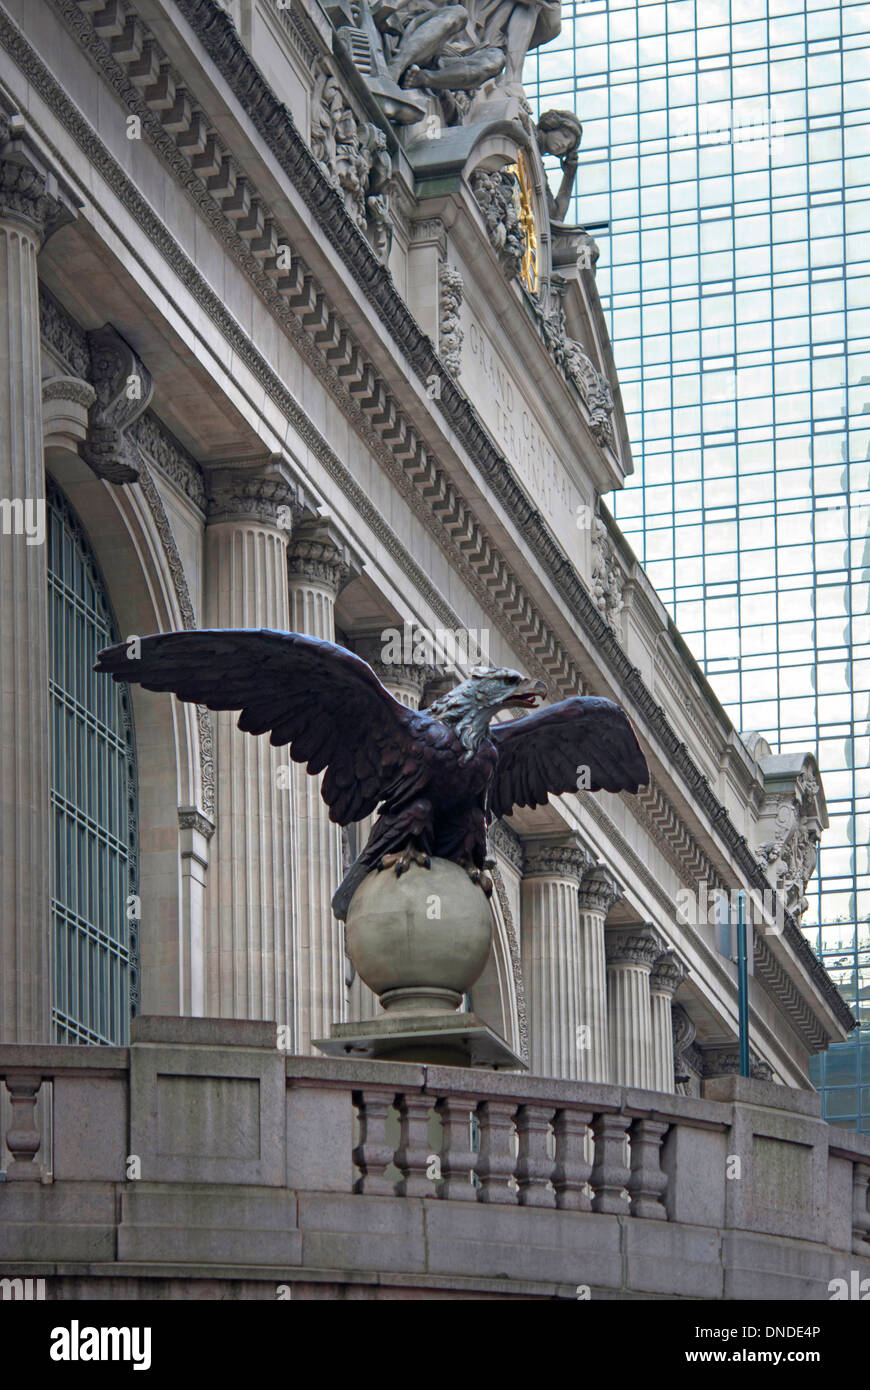 Eagle statue on the facade of Grand Central Terminal train station in New York City Stock Photo